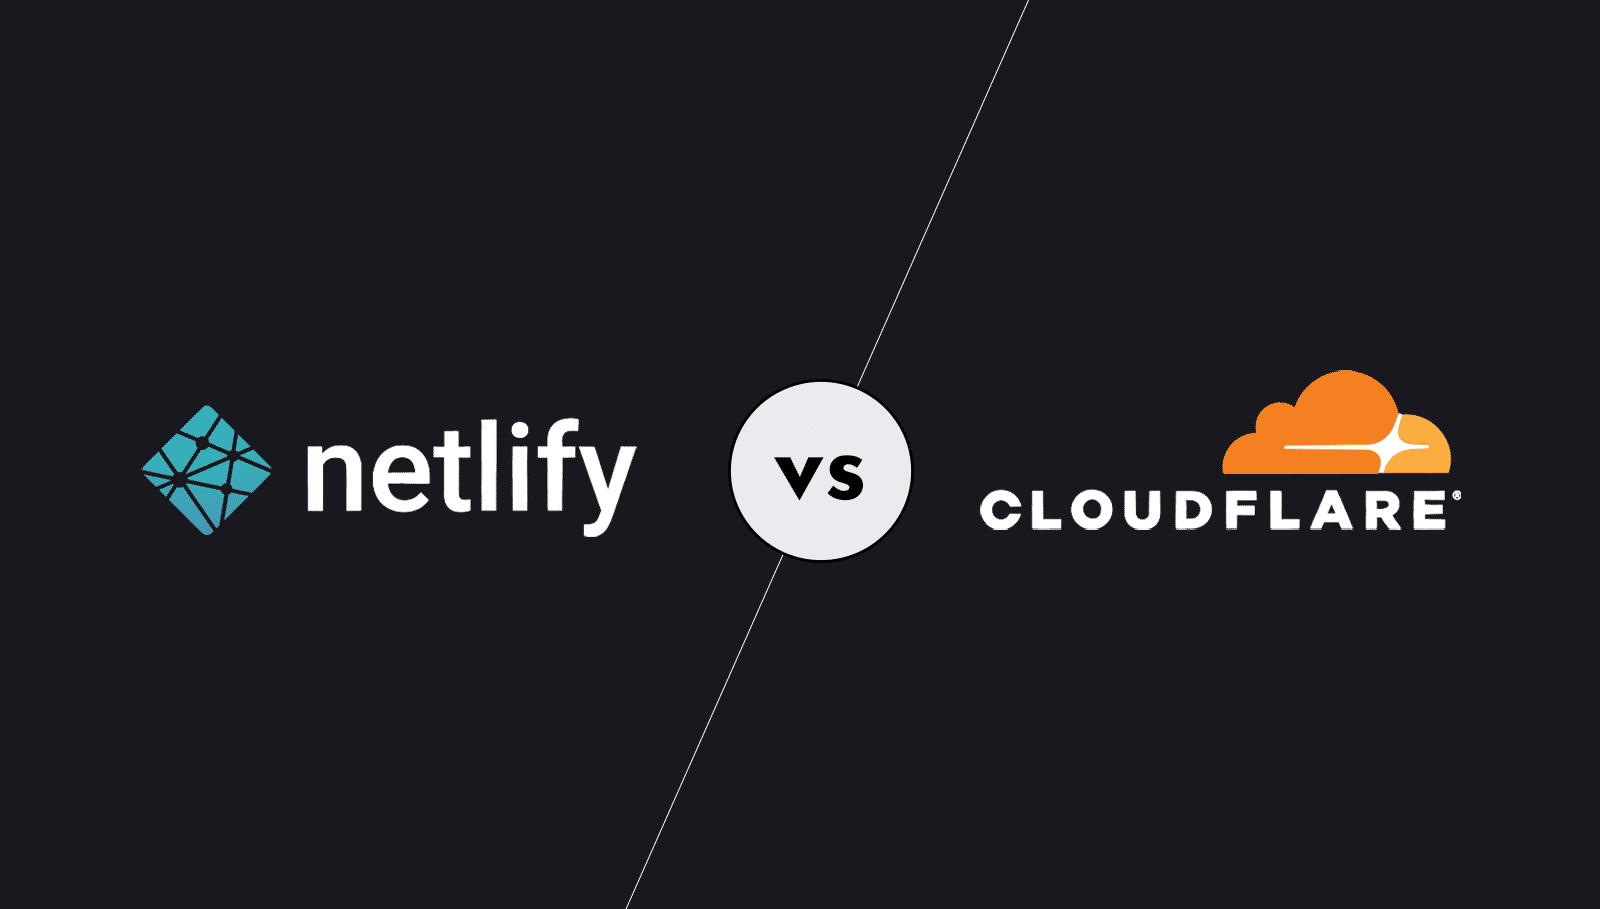 cloudflare-pages-vs-netlify-png.39825